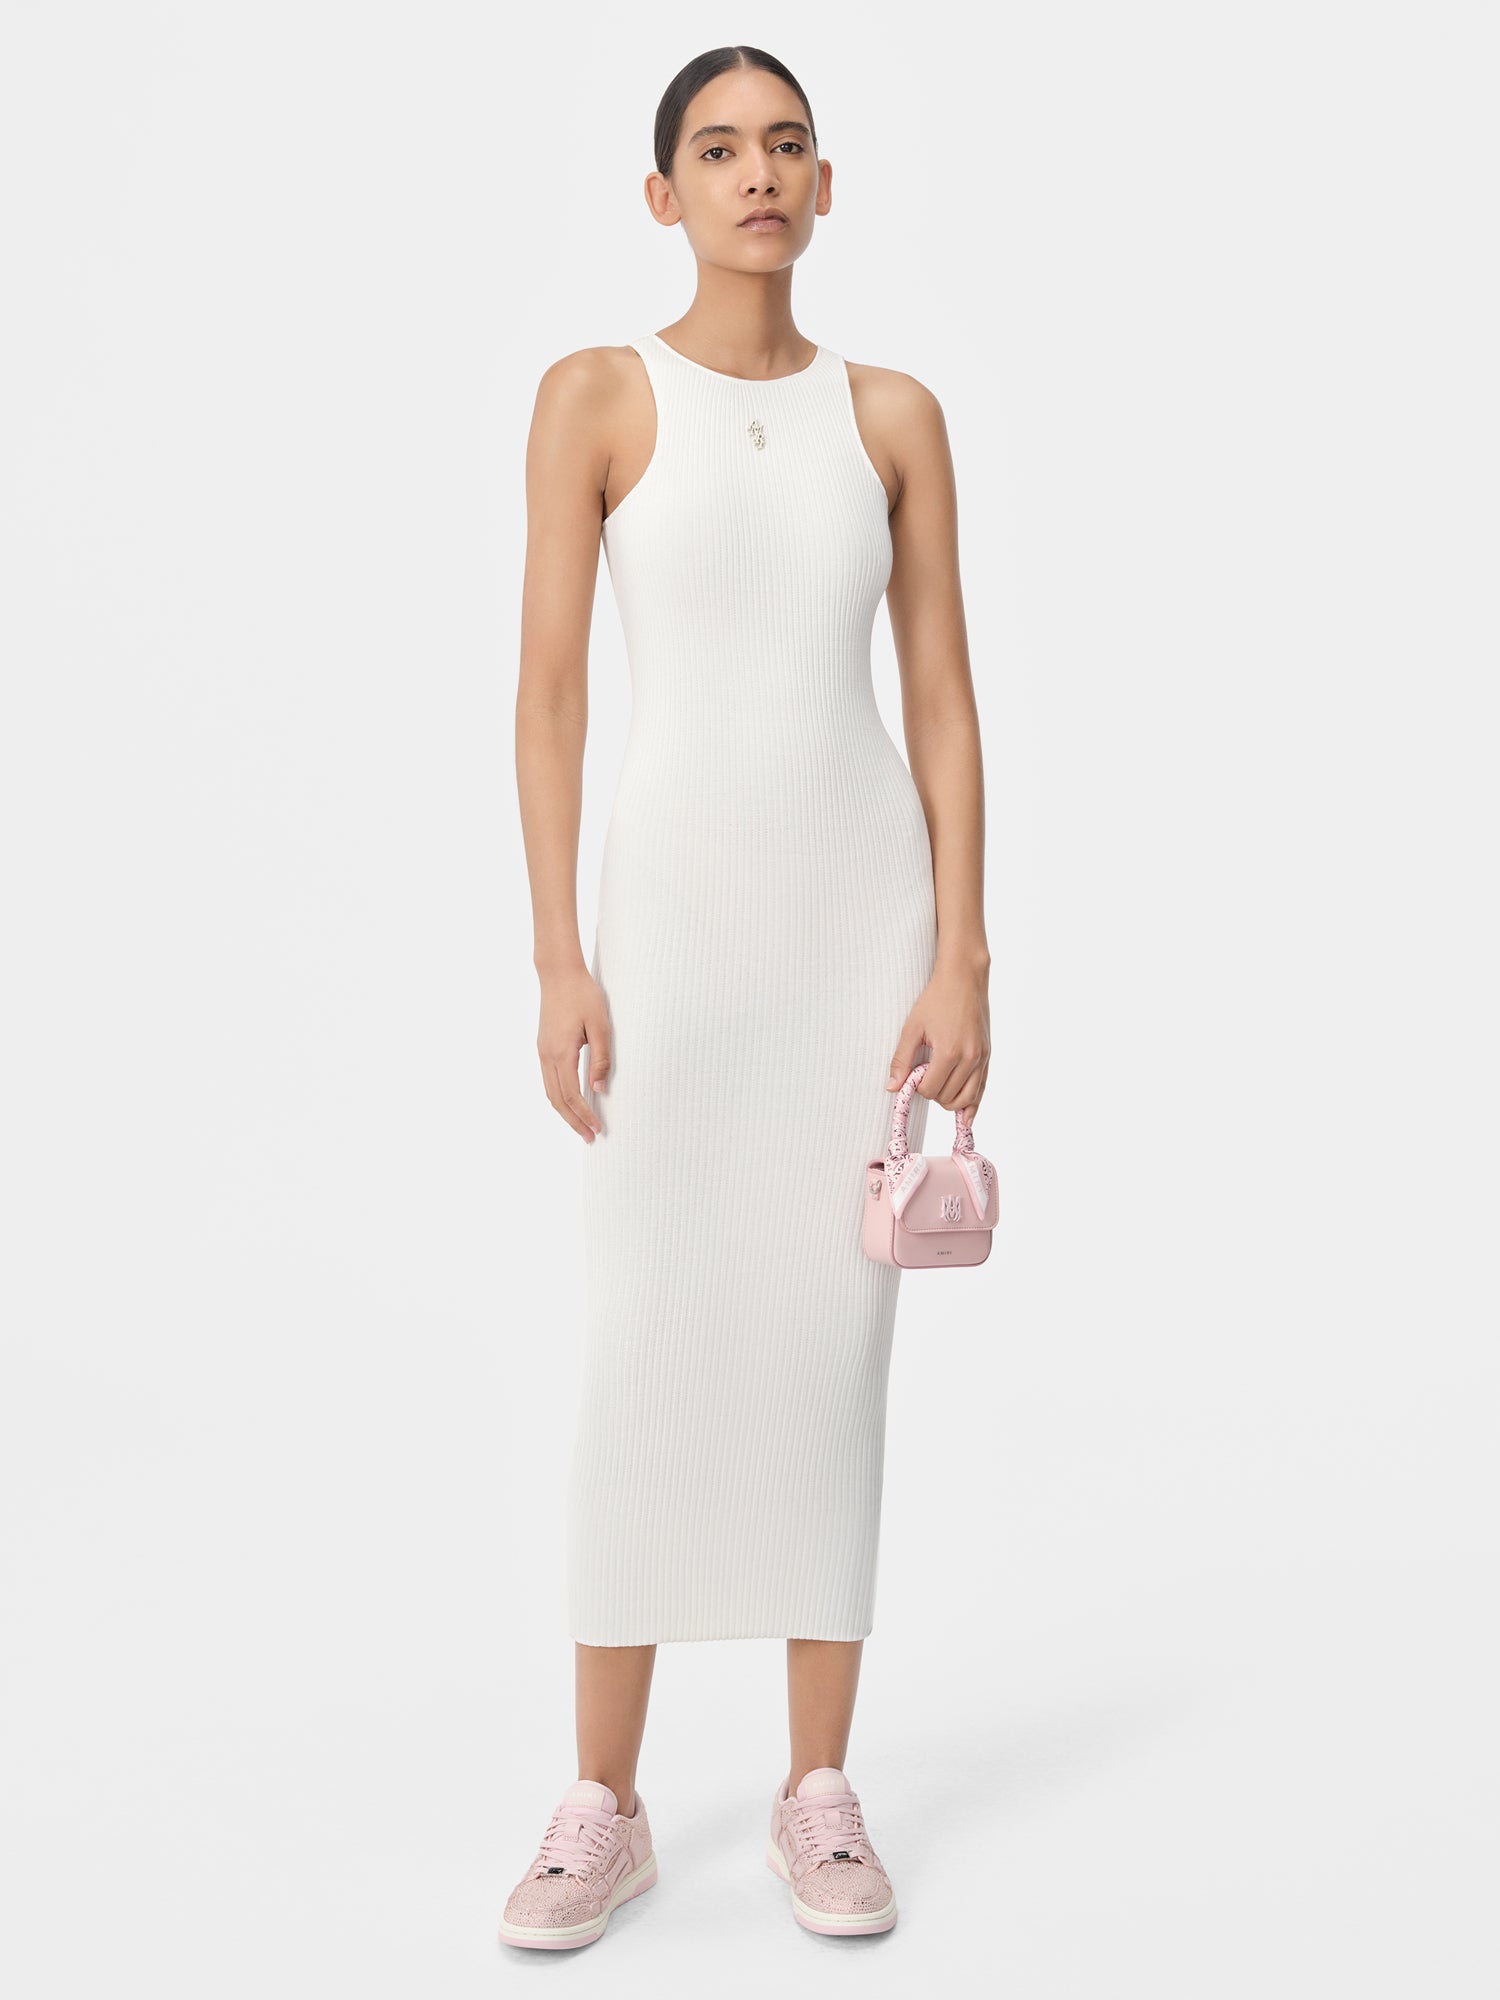 Product WOMEN - WOMEN'S AMIRI STACKED MAXI DRESS - Alabaster featured image